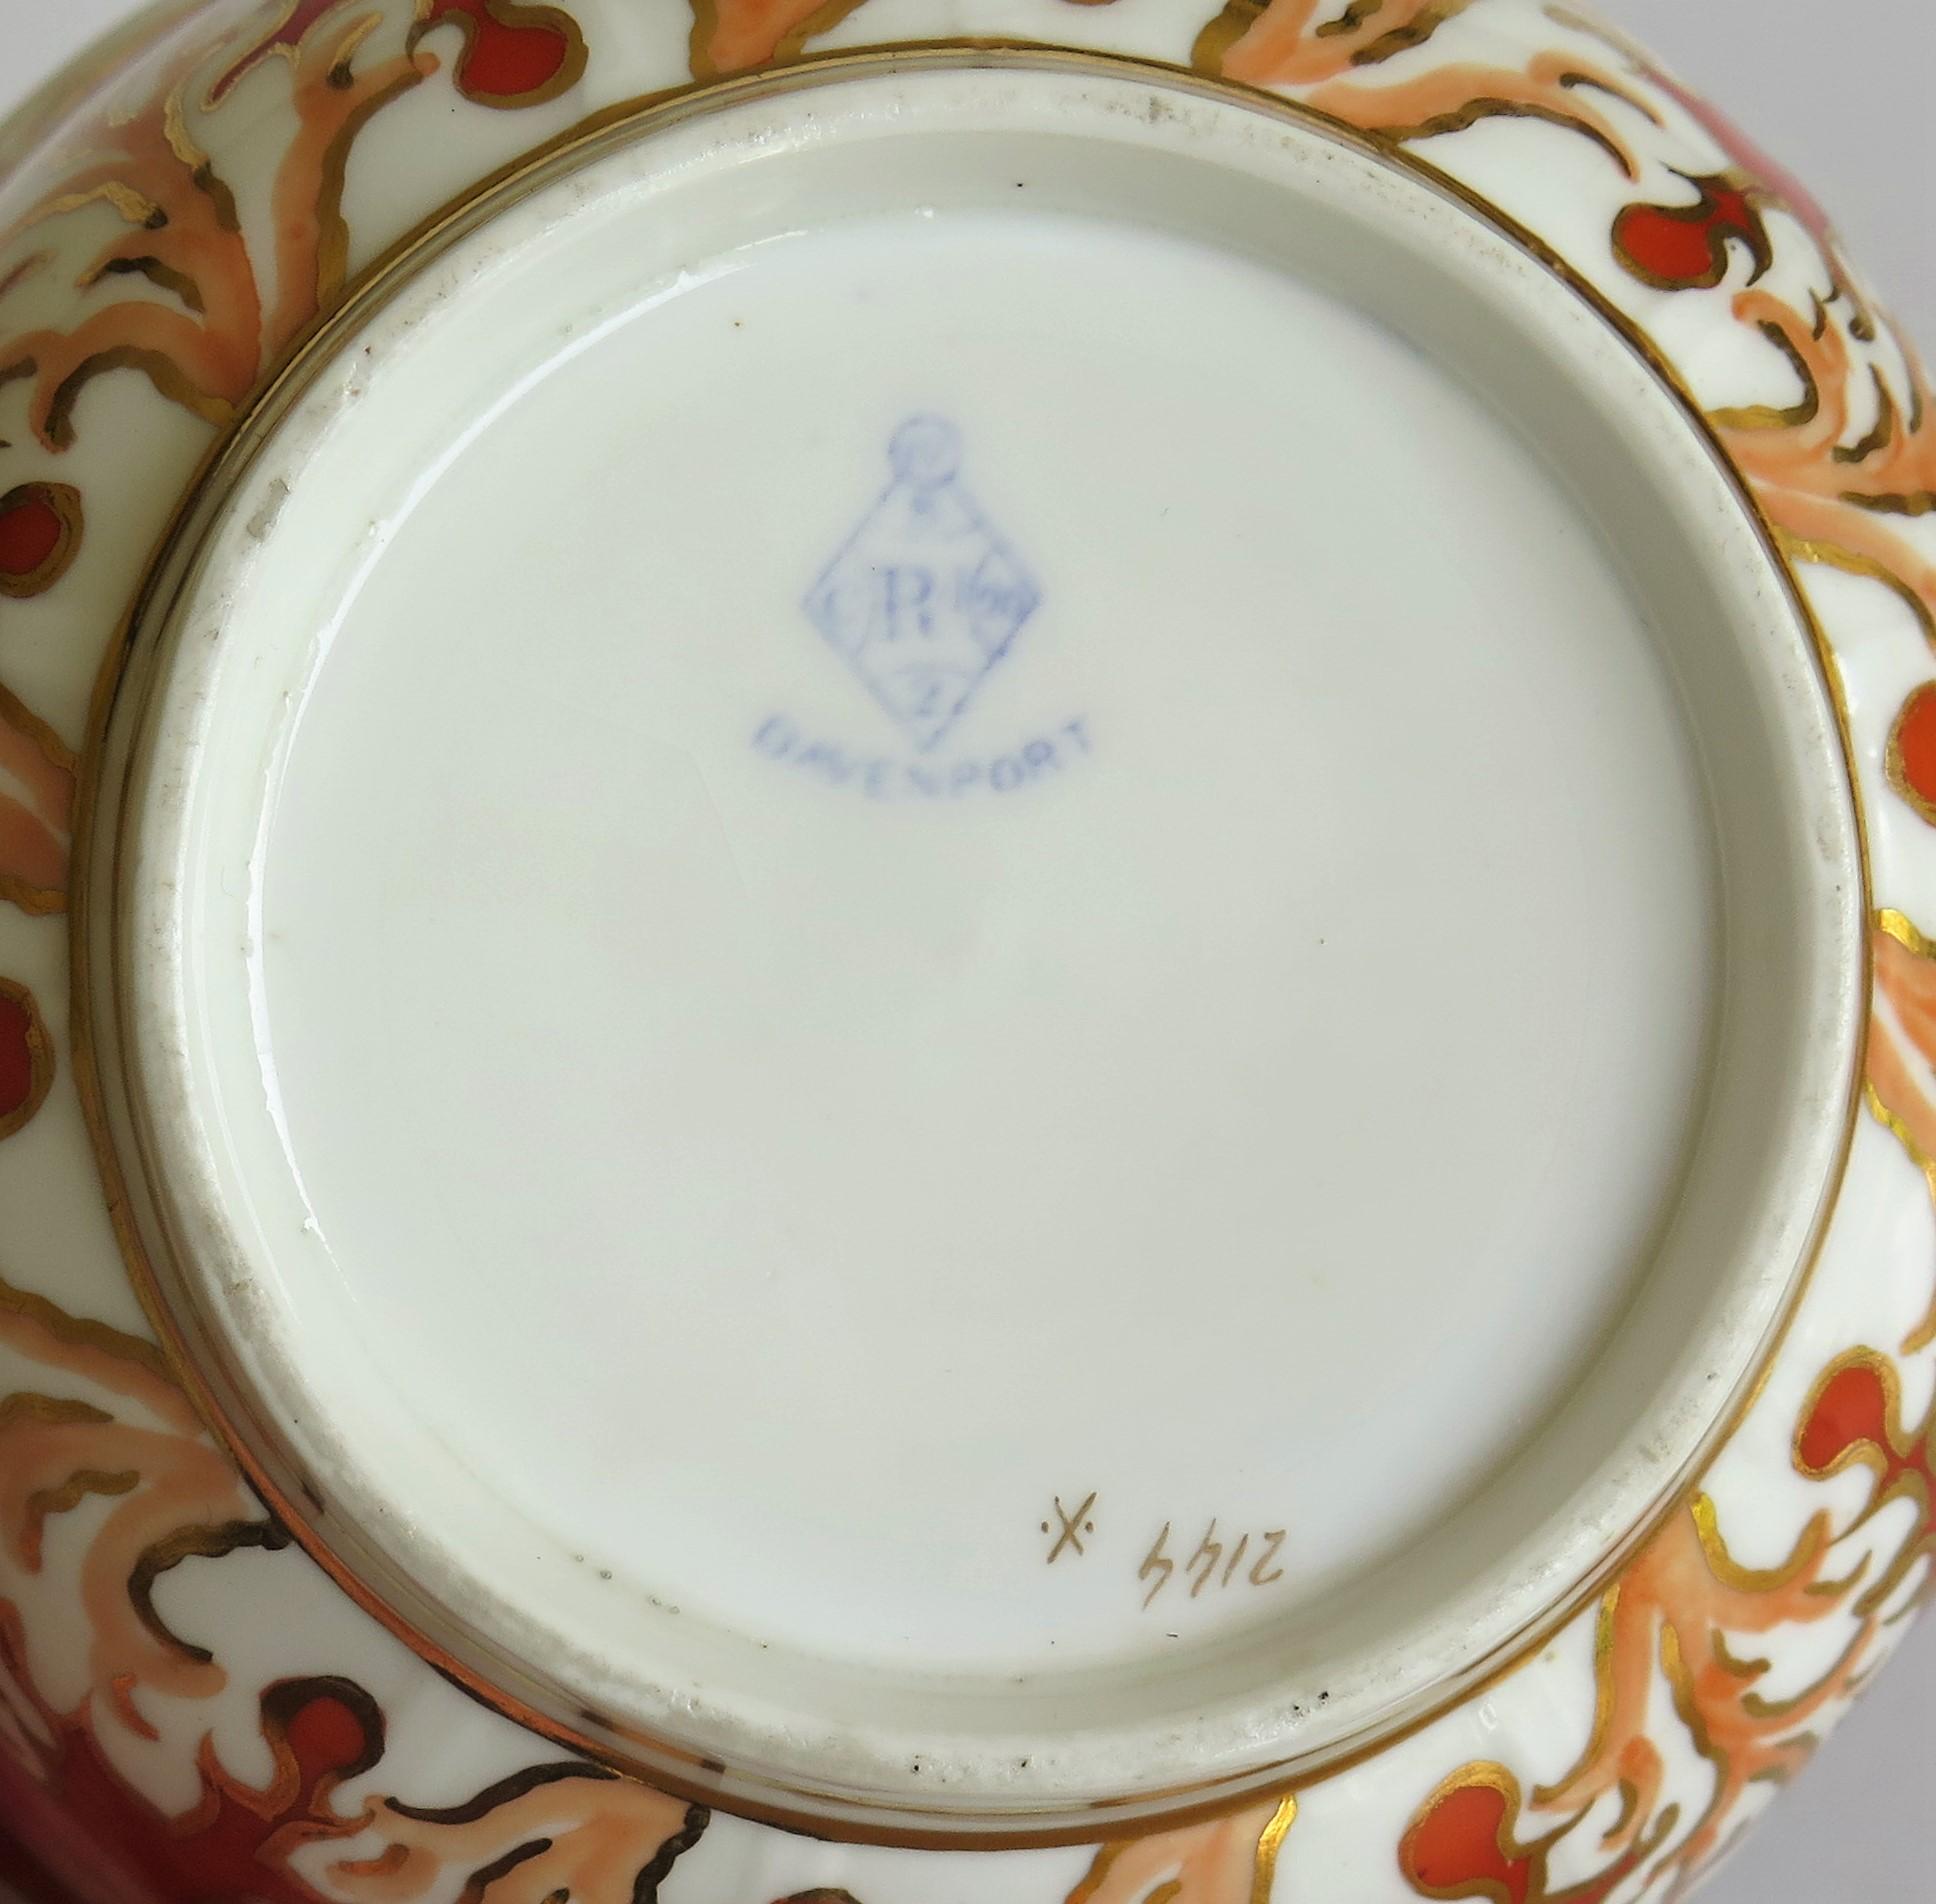 Davenport Porcelain Bowl in Pattern 2144 Fully Marked to Base, English, 1845 12